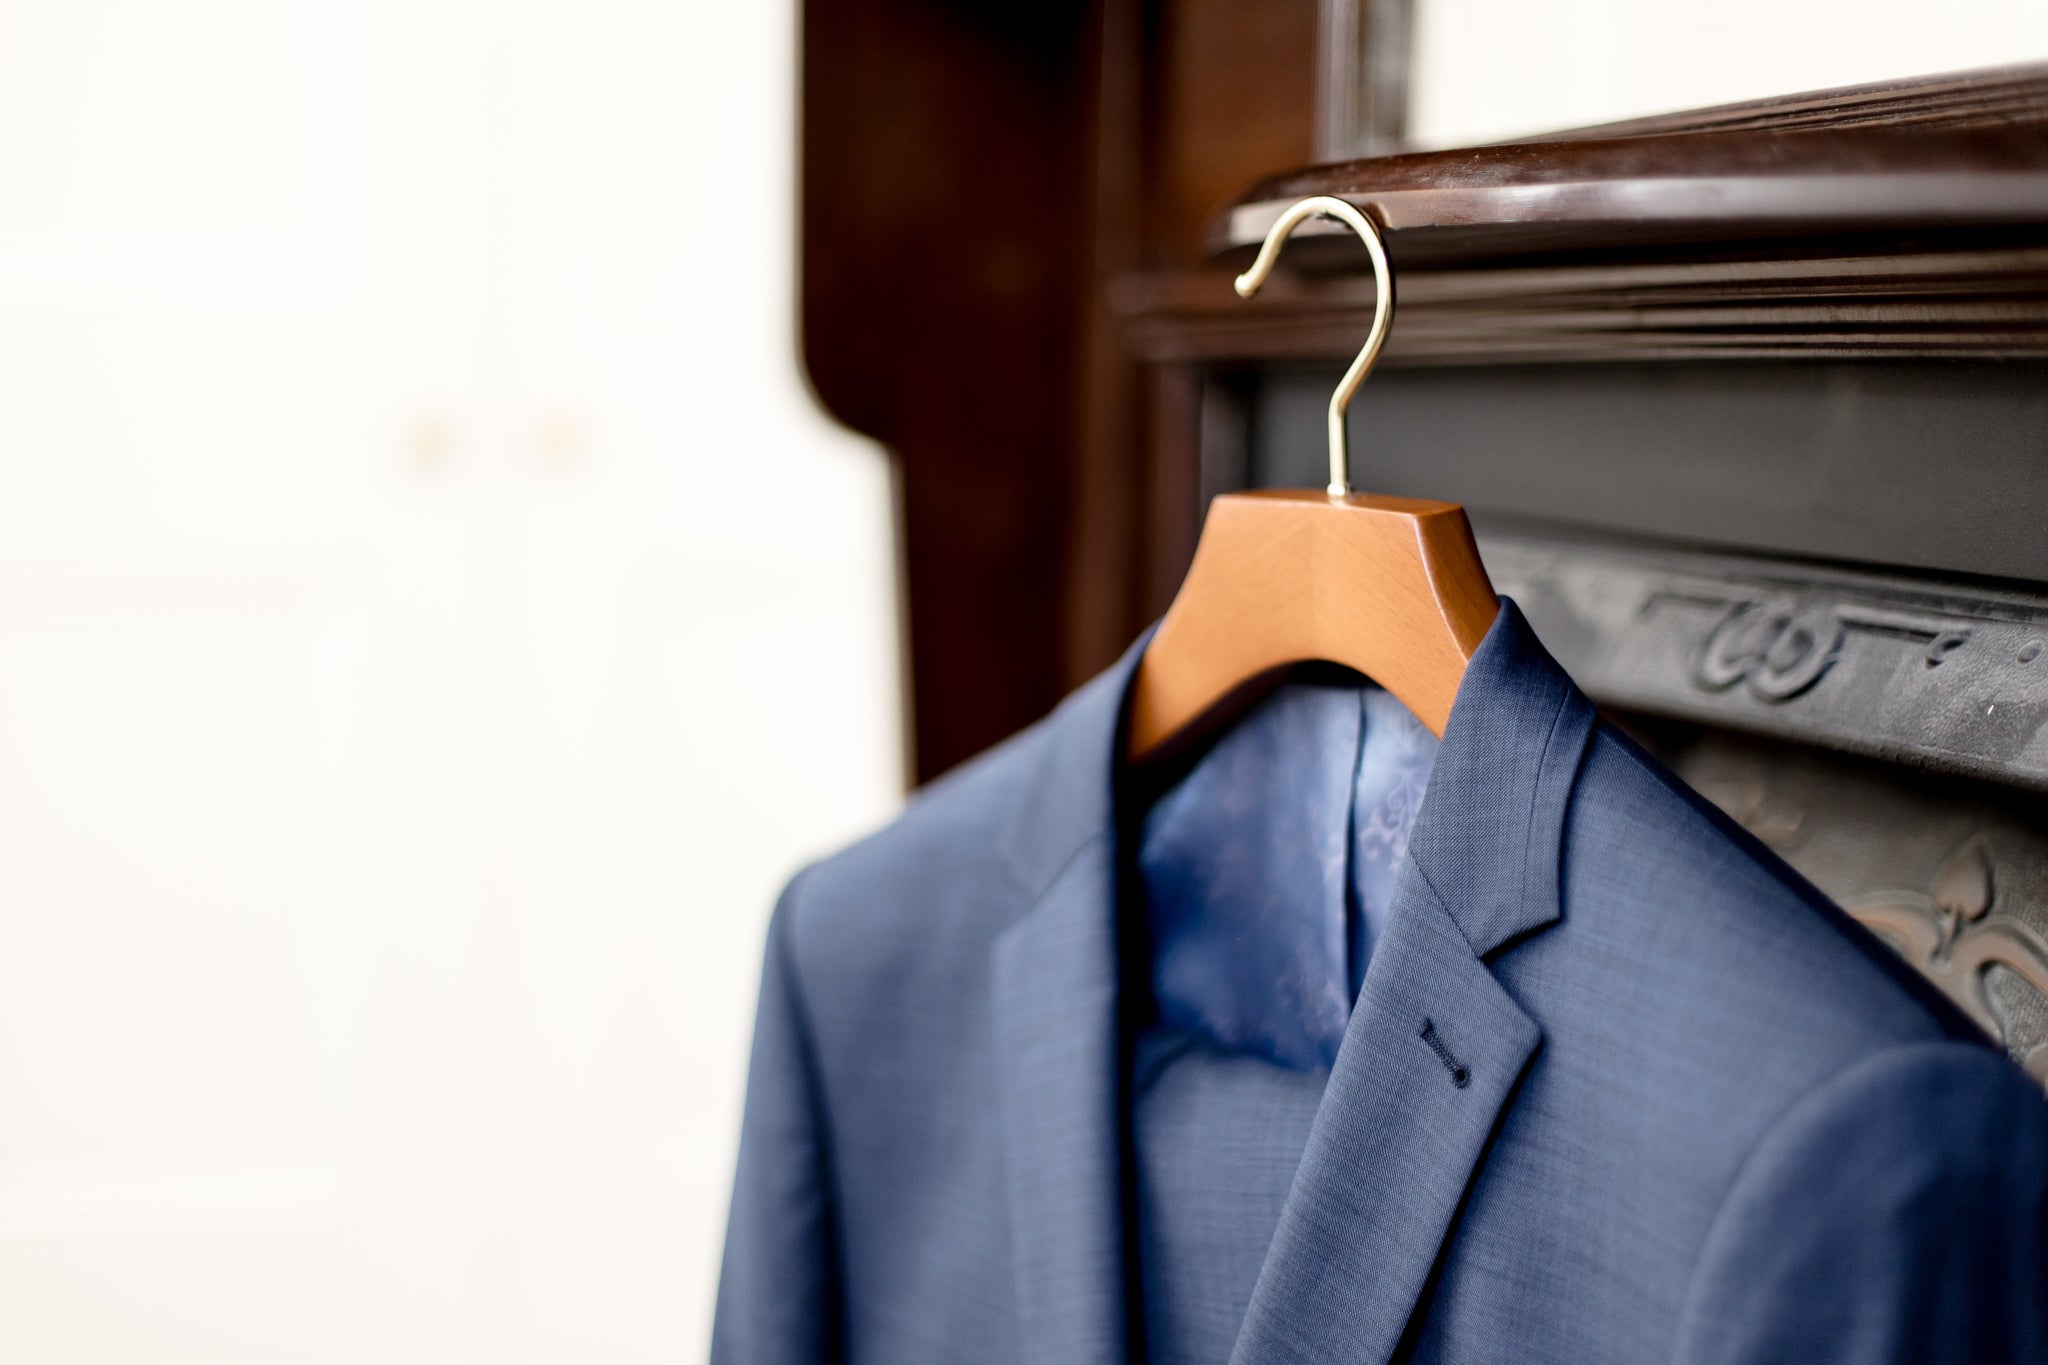 Japan Made Luxury Suit, Trousers, Shirt Hangers